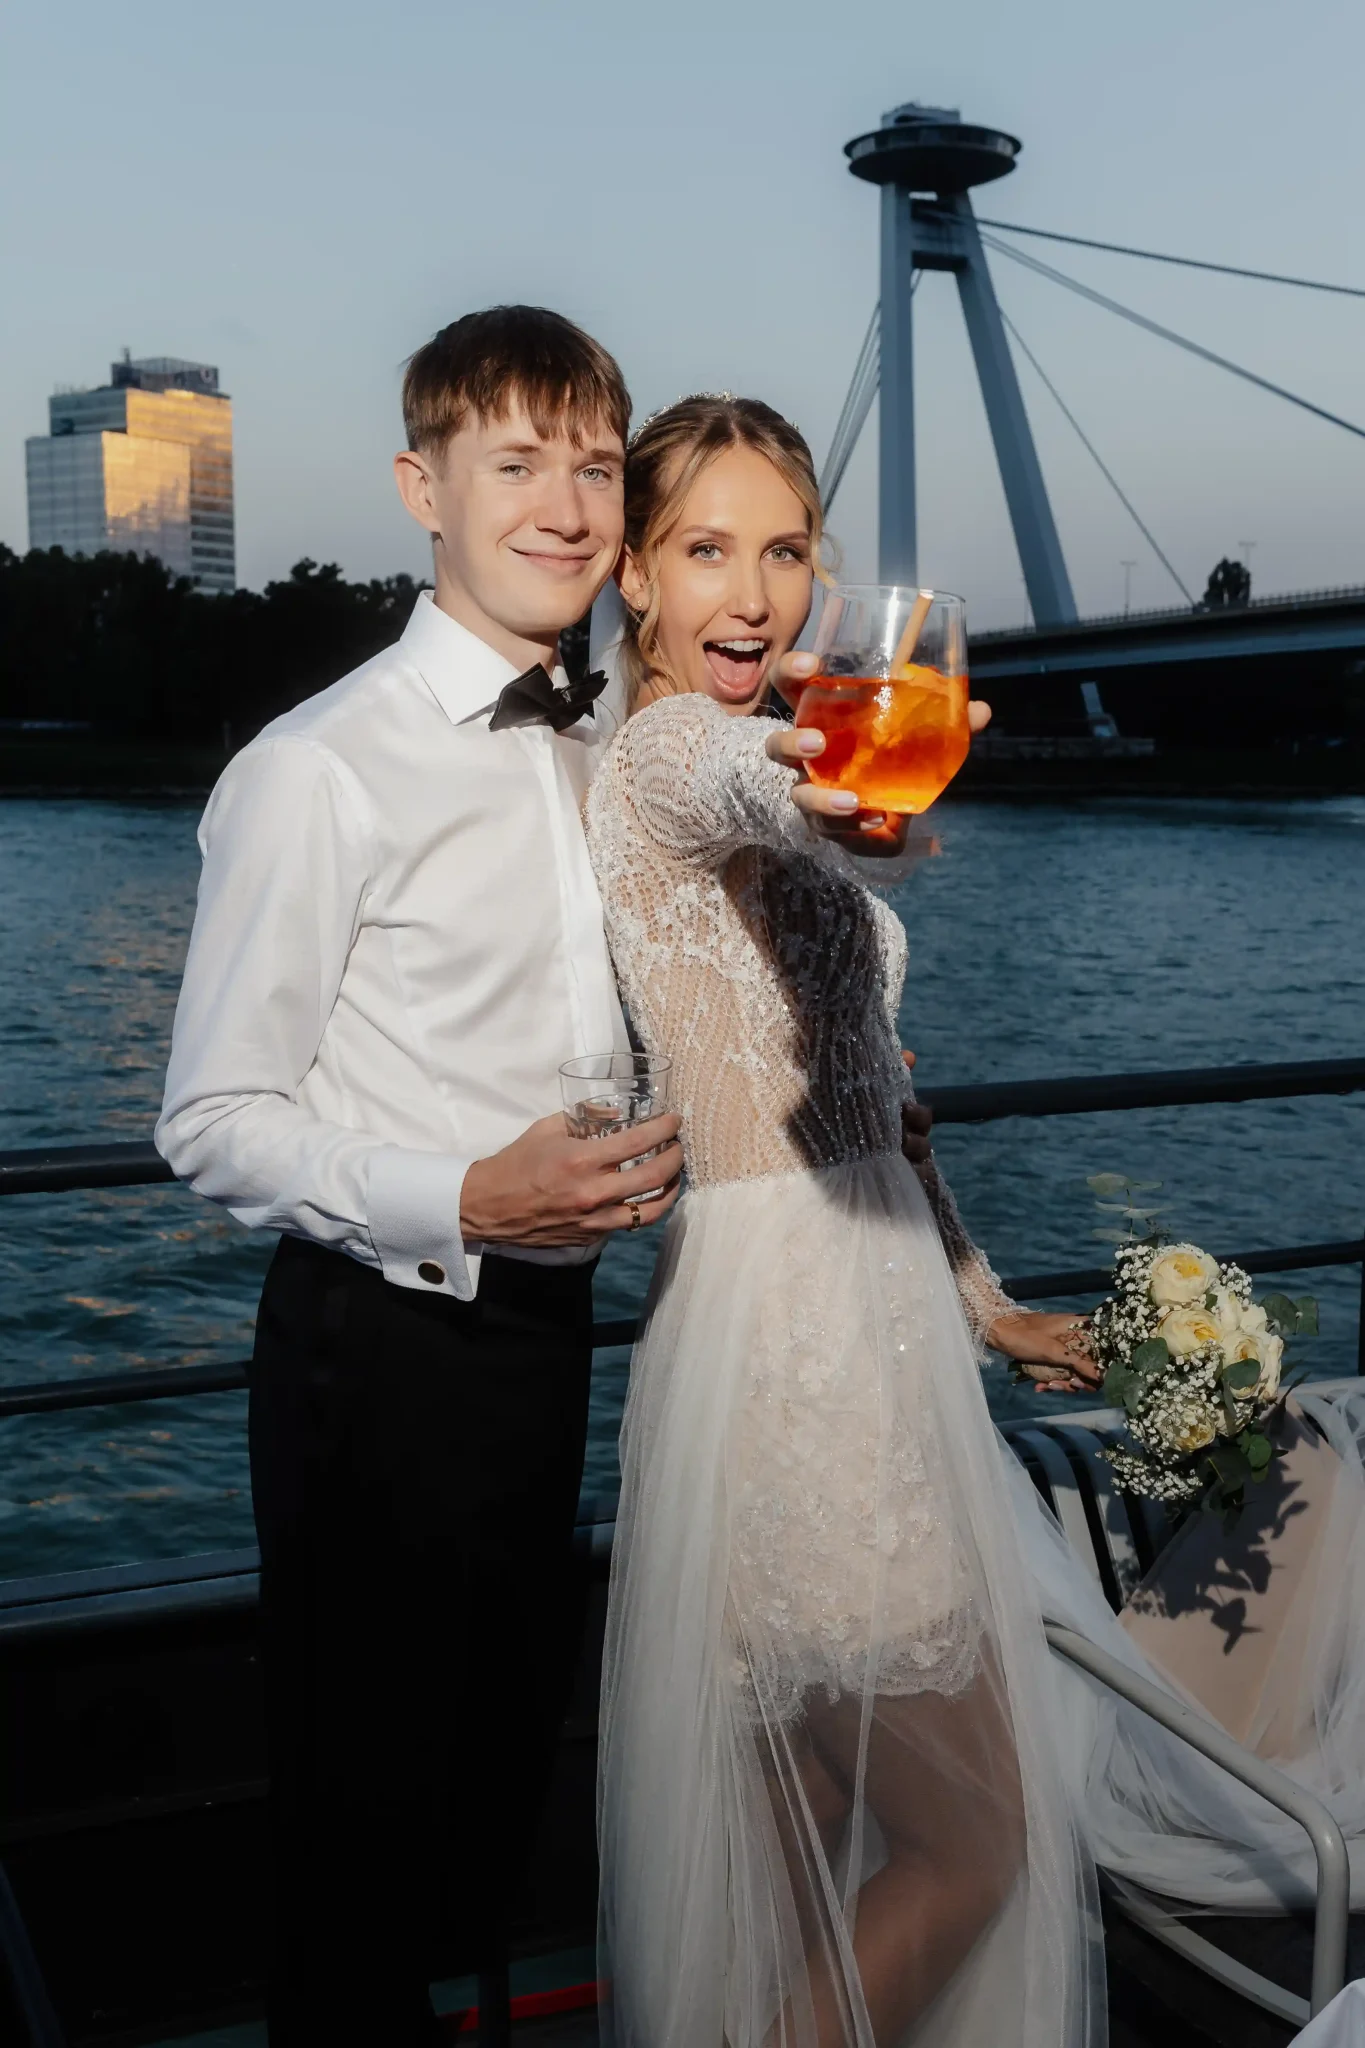 A bride and groom pose for a photo on a boat.